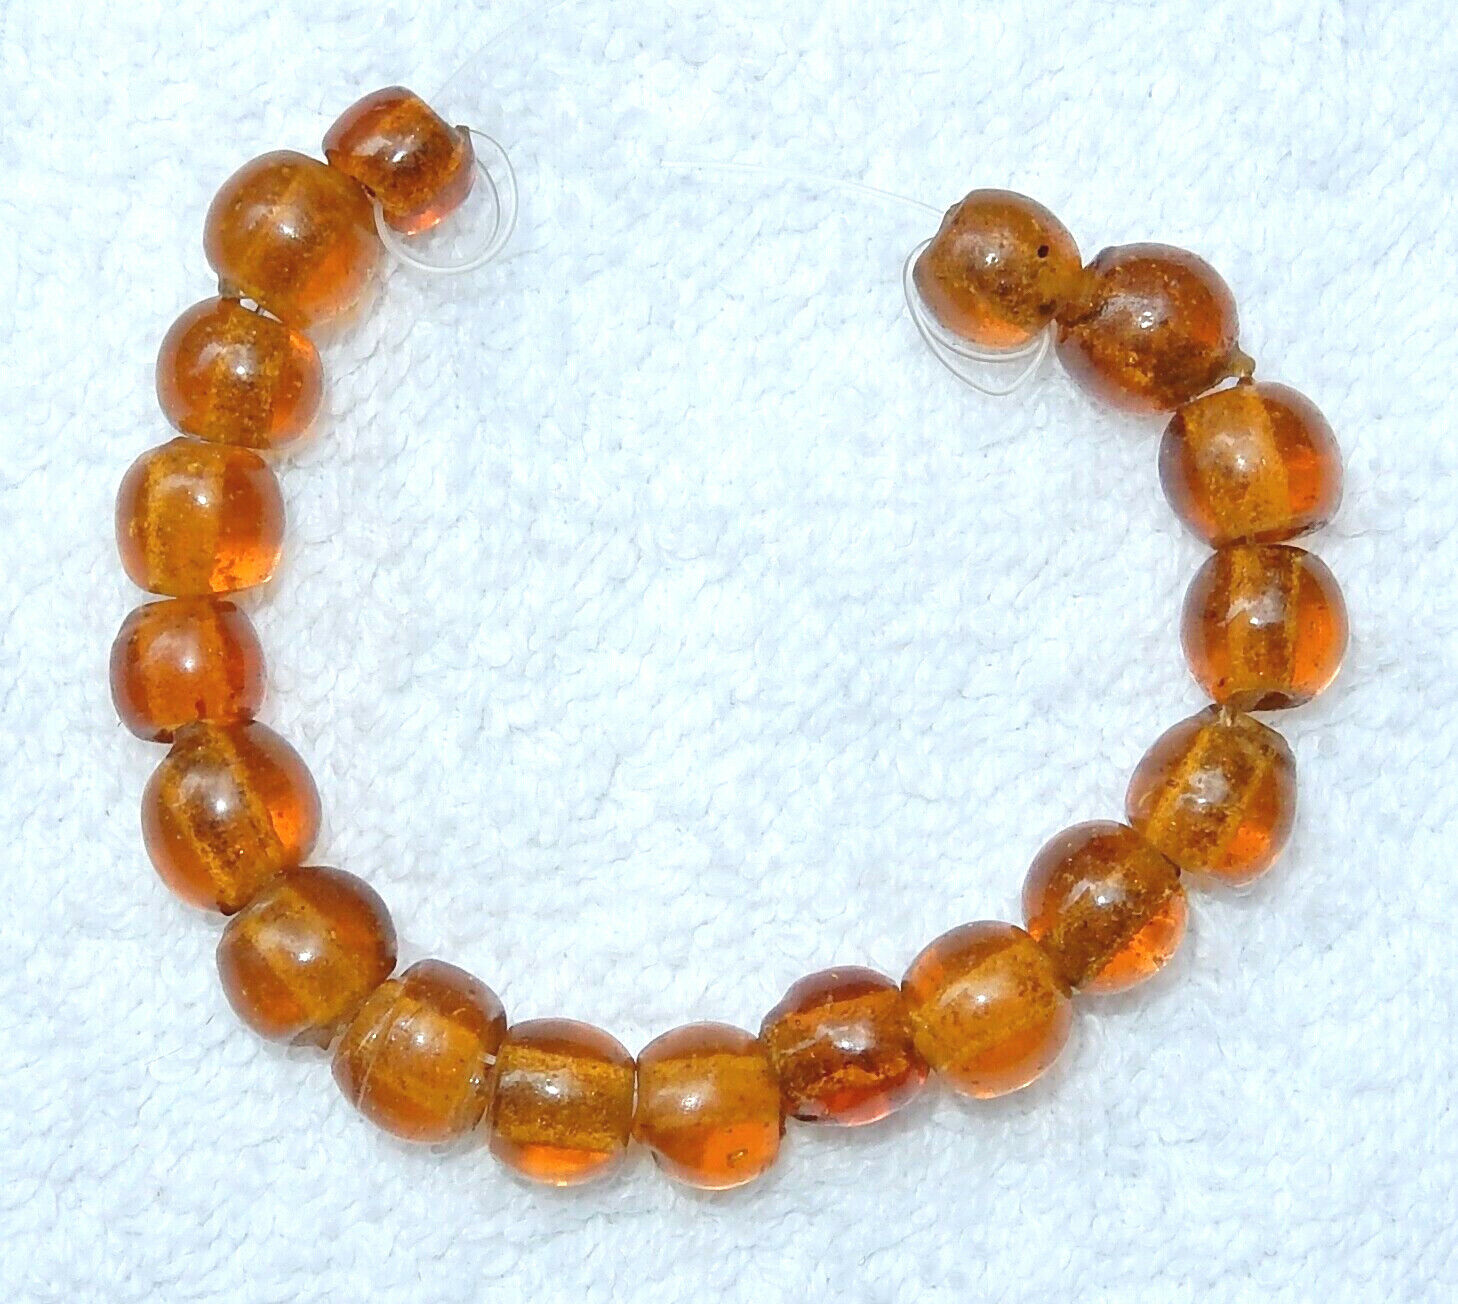 18 BEAUTIFUL OLD VINTAGE TRANSLUCENT AMBER CHINESE PEKING GLASS 9mm BEADS NOS